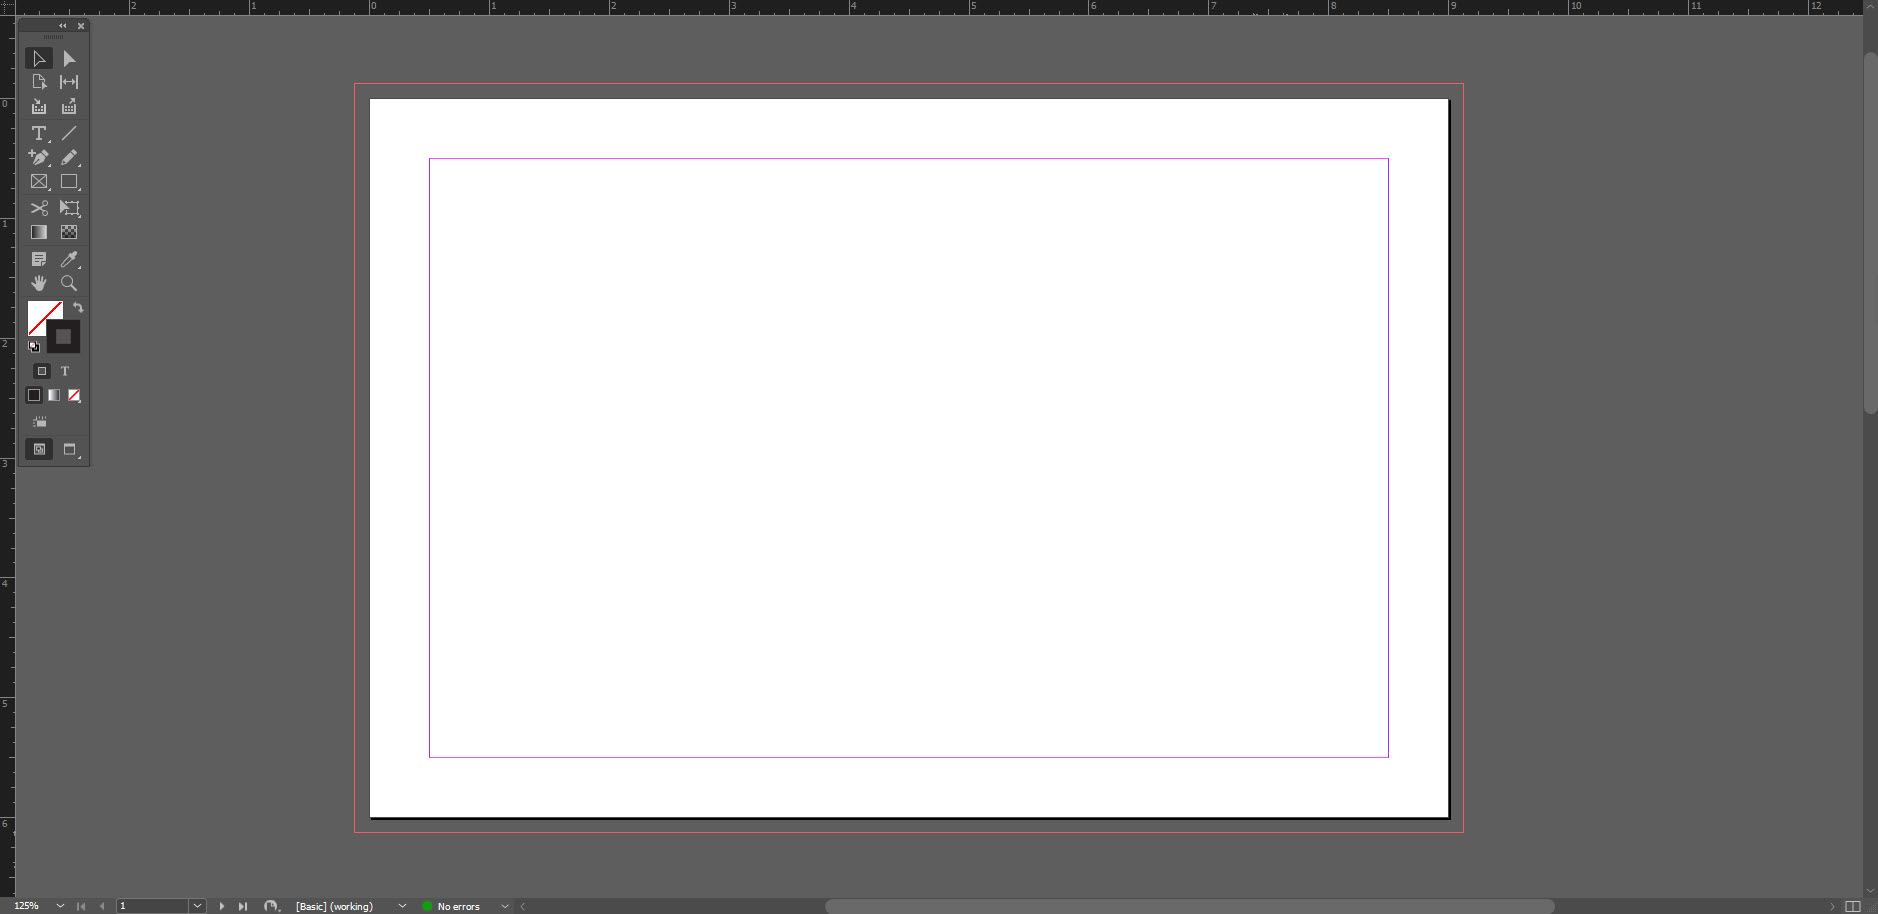 Screenshot of Adobe InDesign workspace showing a blank document.